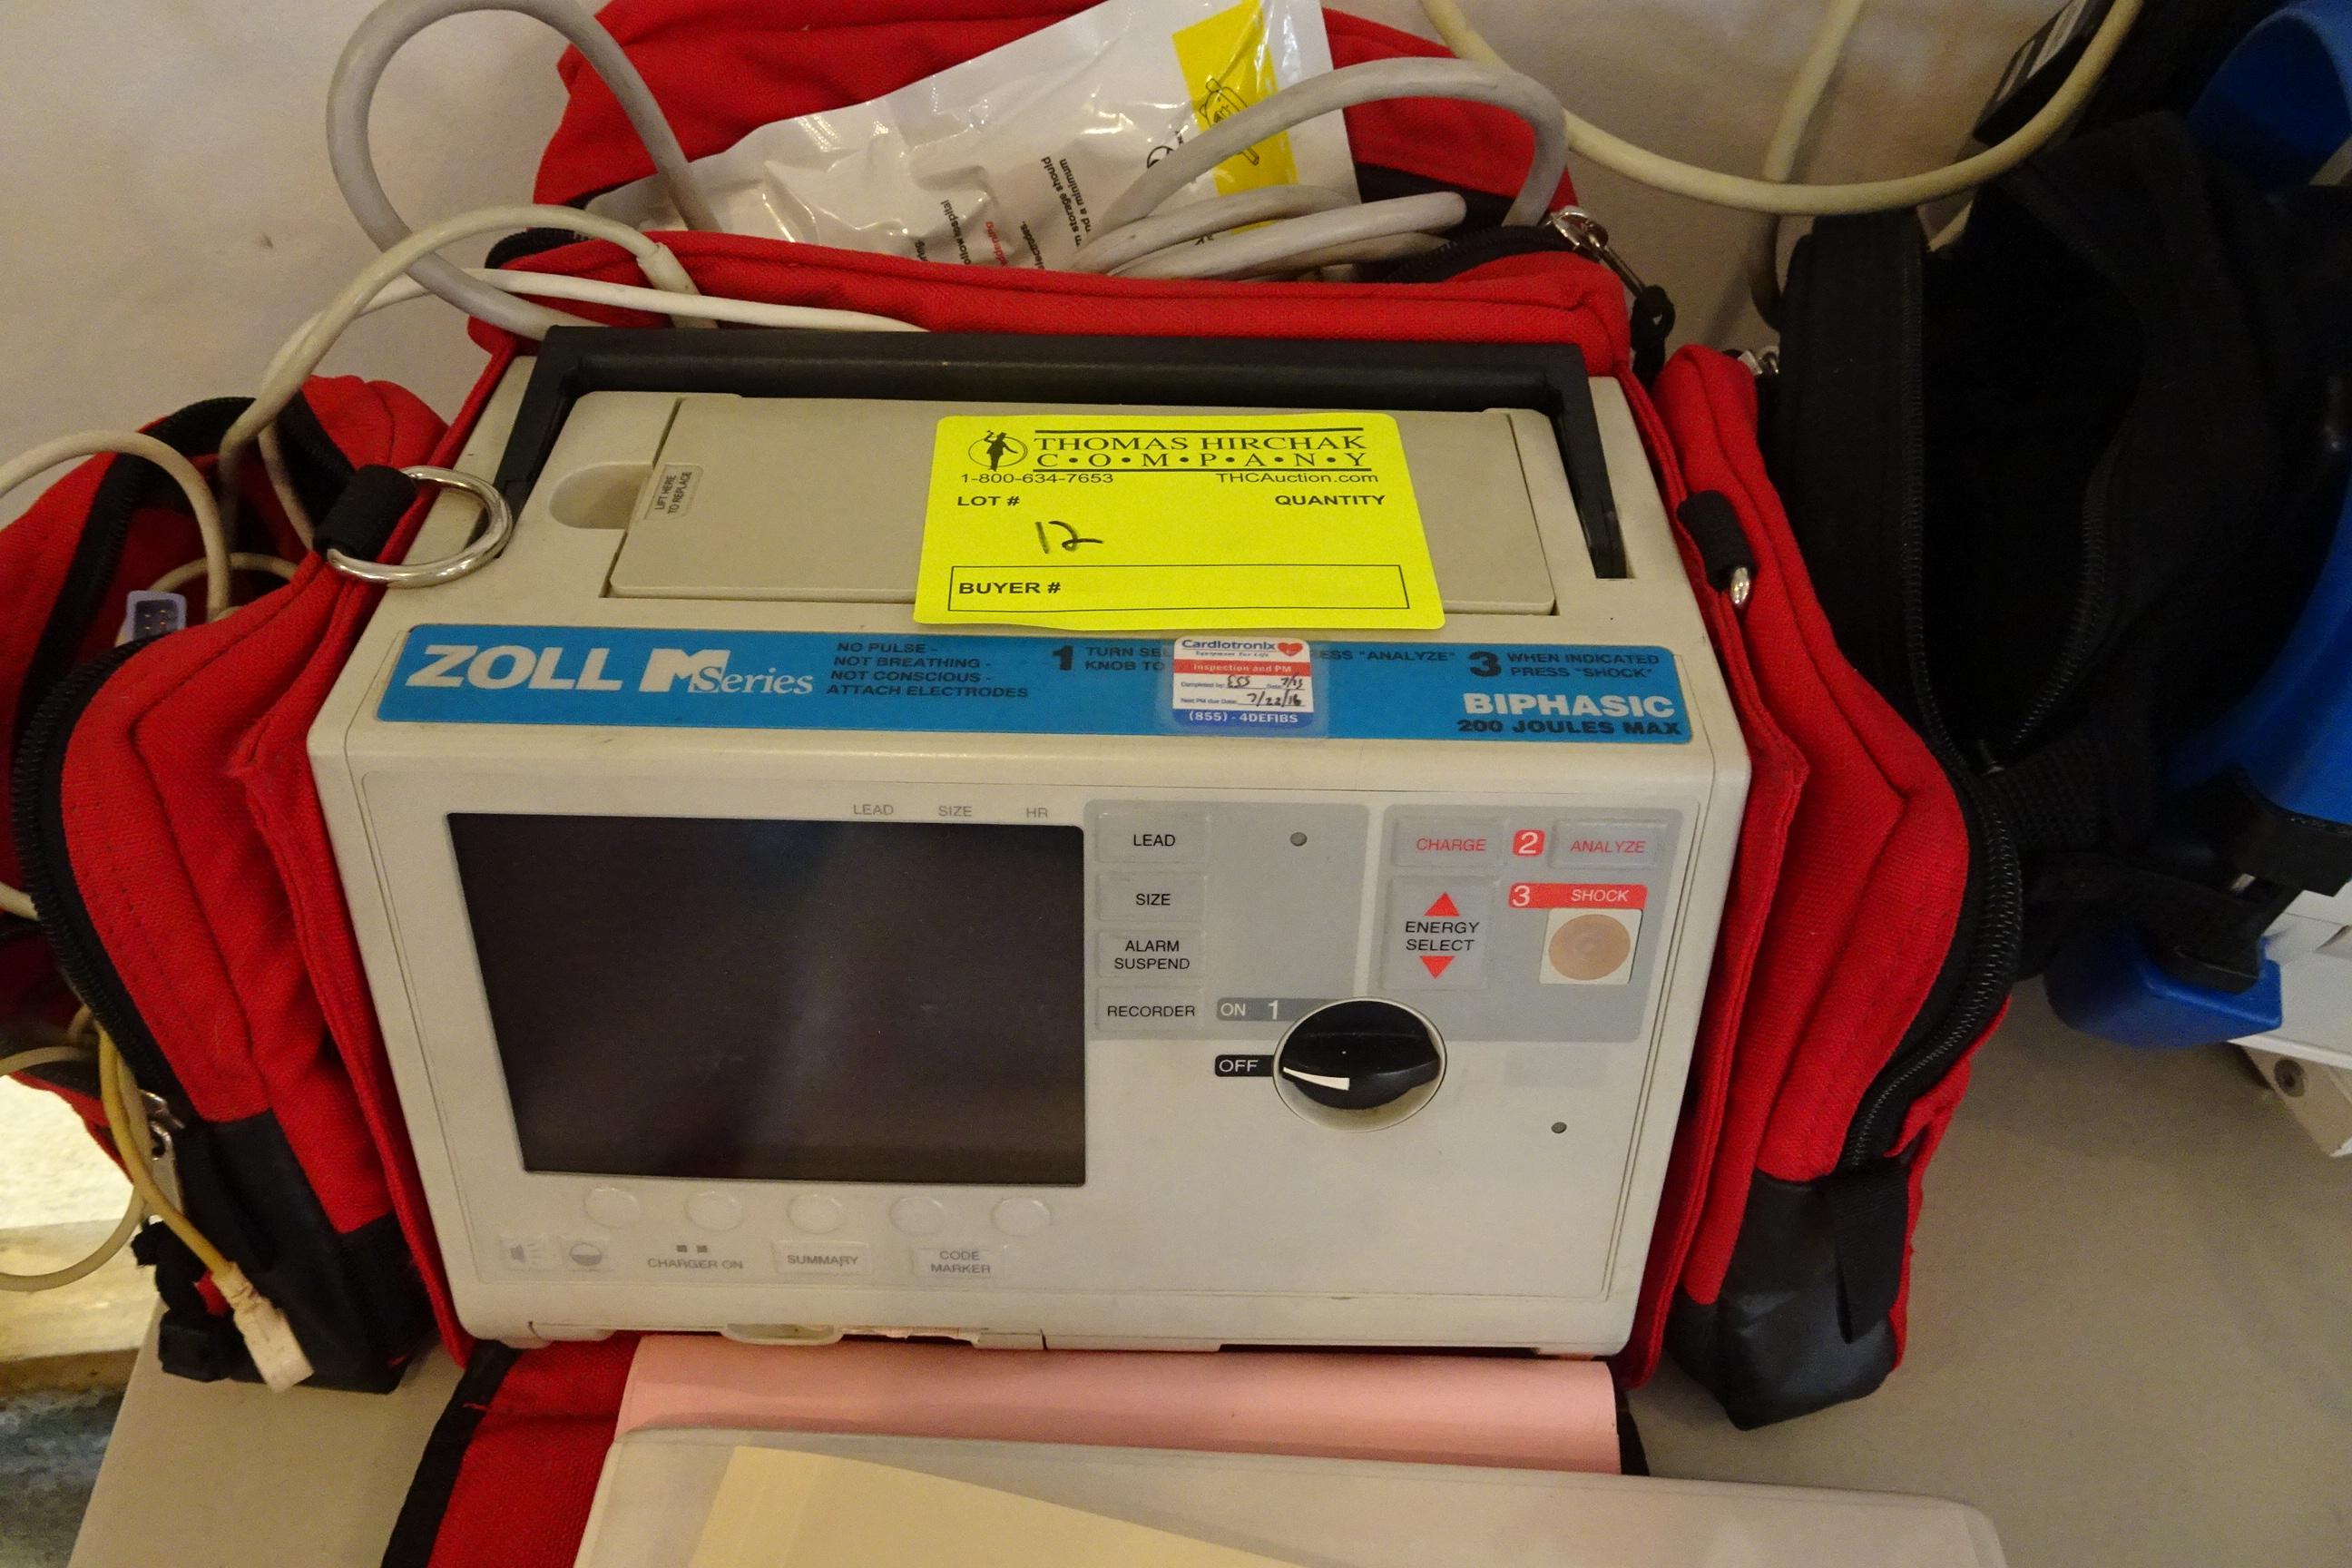 Zoll M Series Biphasic 200 Joules Max #TO1F23291 defibrillator